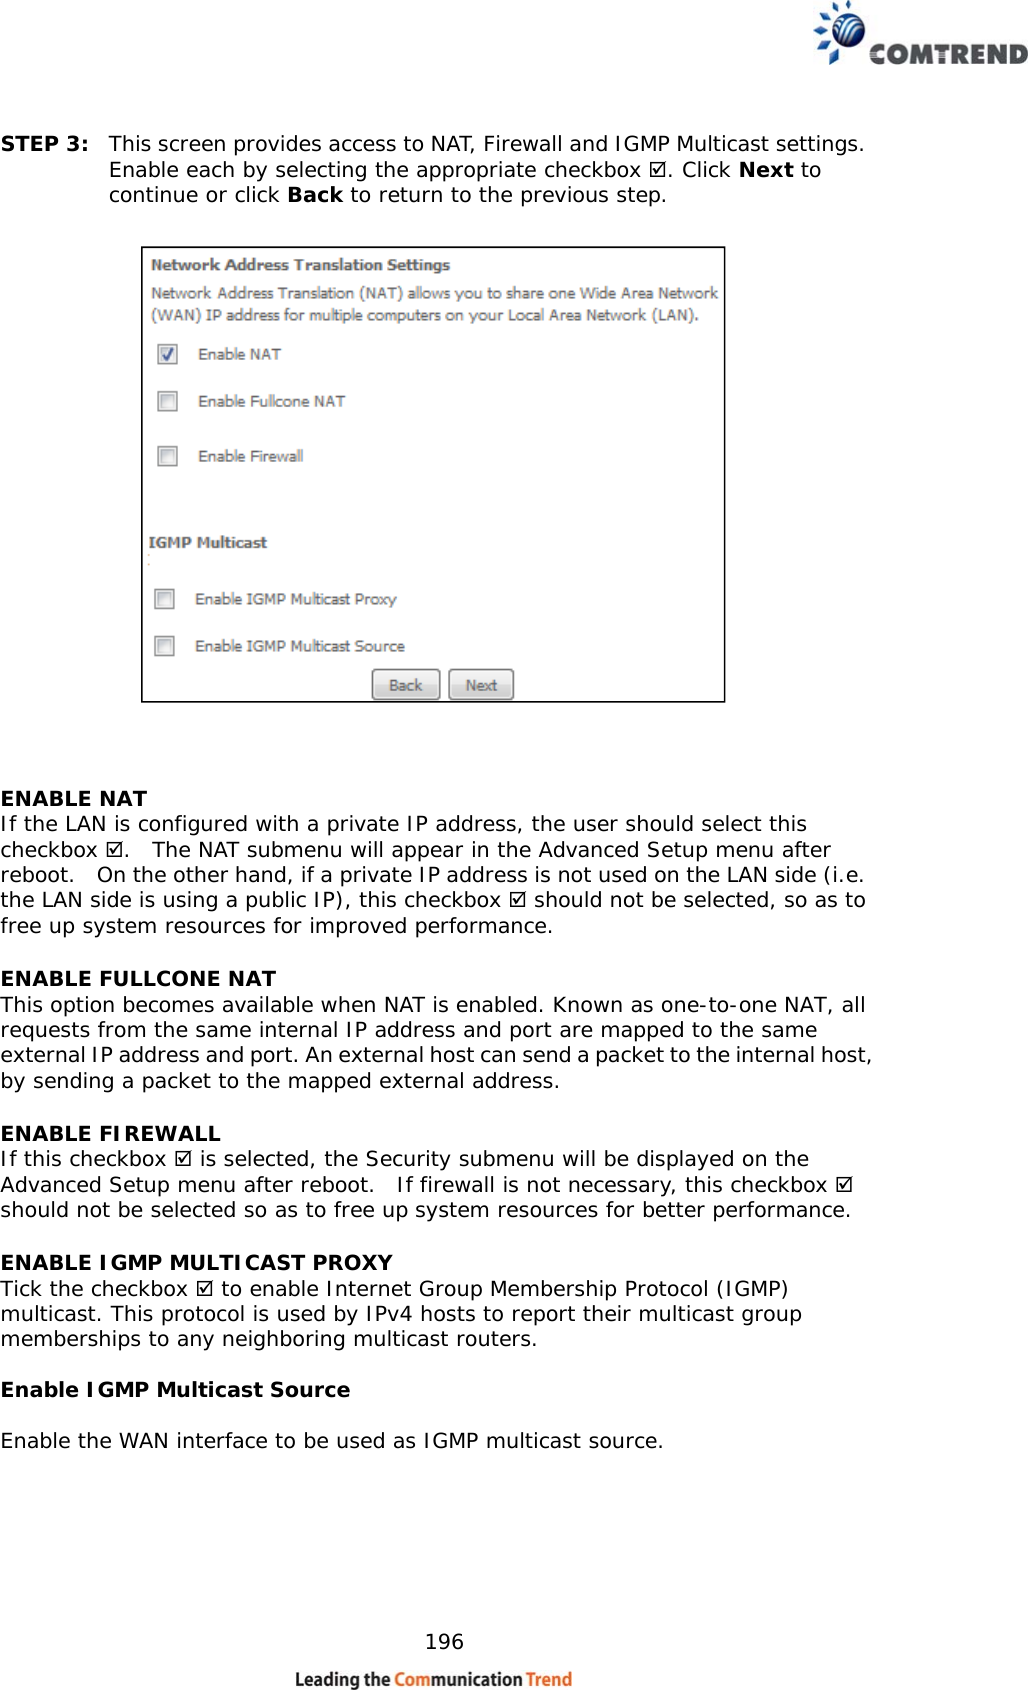    196 STEP 3:  This screen provides access to NAT, Firewall and IGMP Multicast settings. Enable each by selecting the appropriate checkbox . Click Next to continue or click Back to return to the previous step.    ENABLE NAT If the LAN is configured with a private IP address, the user should select this checkbox .  The NAT submenu will appear in the Advanced Setup menu after reboot.   On the other hand, if a private IP address is not used on the LAN side (i.e. the LAN side is using a public IP), this checkbox  should not be selected, so as to free up system resources for improved performance. ENABLE FULLCONE NAT   This option becomes available when NAT is enabled. Known as one-to-one NAT, all requests from the same internal IP address and port are mapped to the same external IP address and port. An external host can send a packet to the internal host, by sending a packet to the mapped external address. ENABLE FIREWALL If this checkbox  is selected, the Security submenu will be displayed on the Advanced Setup menu after reboot.  If firewall is not necessary, this checkbox  should not be selected so as to free up system resources for better performance.   ENABLE IGMP MULTICAST PROXY Tick the checkbox  to enable Internet Group Membership Protocol (IGMP) multicast. This protocol is used by IPv4 hosts to report their multicast group memberships to any neighboring multicast routers.  Enable IGMP Multicast Source  Enable the WAN interface to be used as IGMP multicast source.       